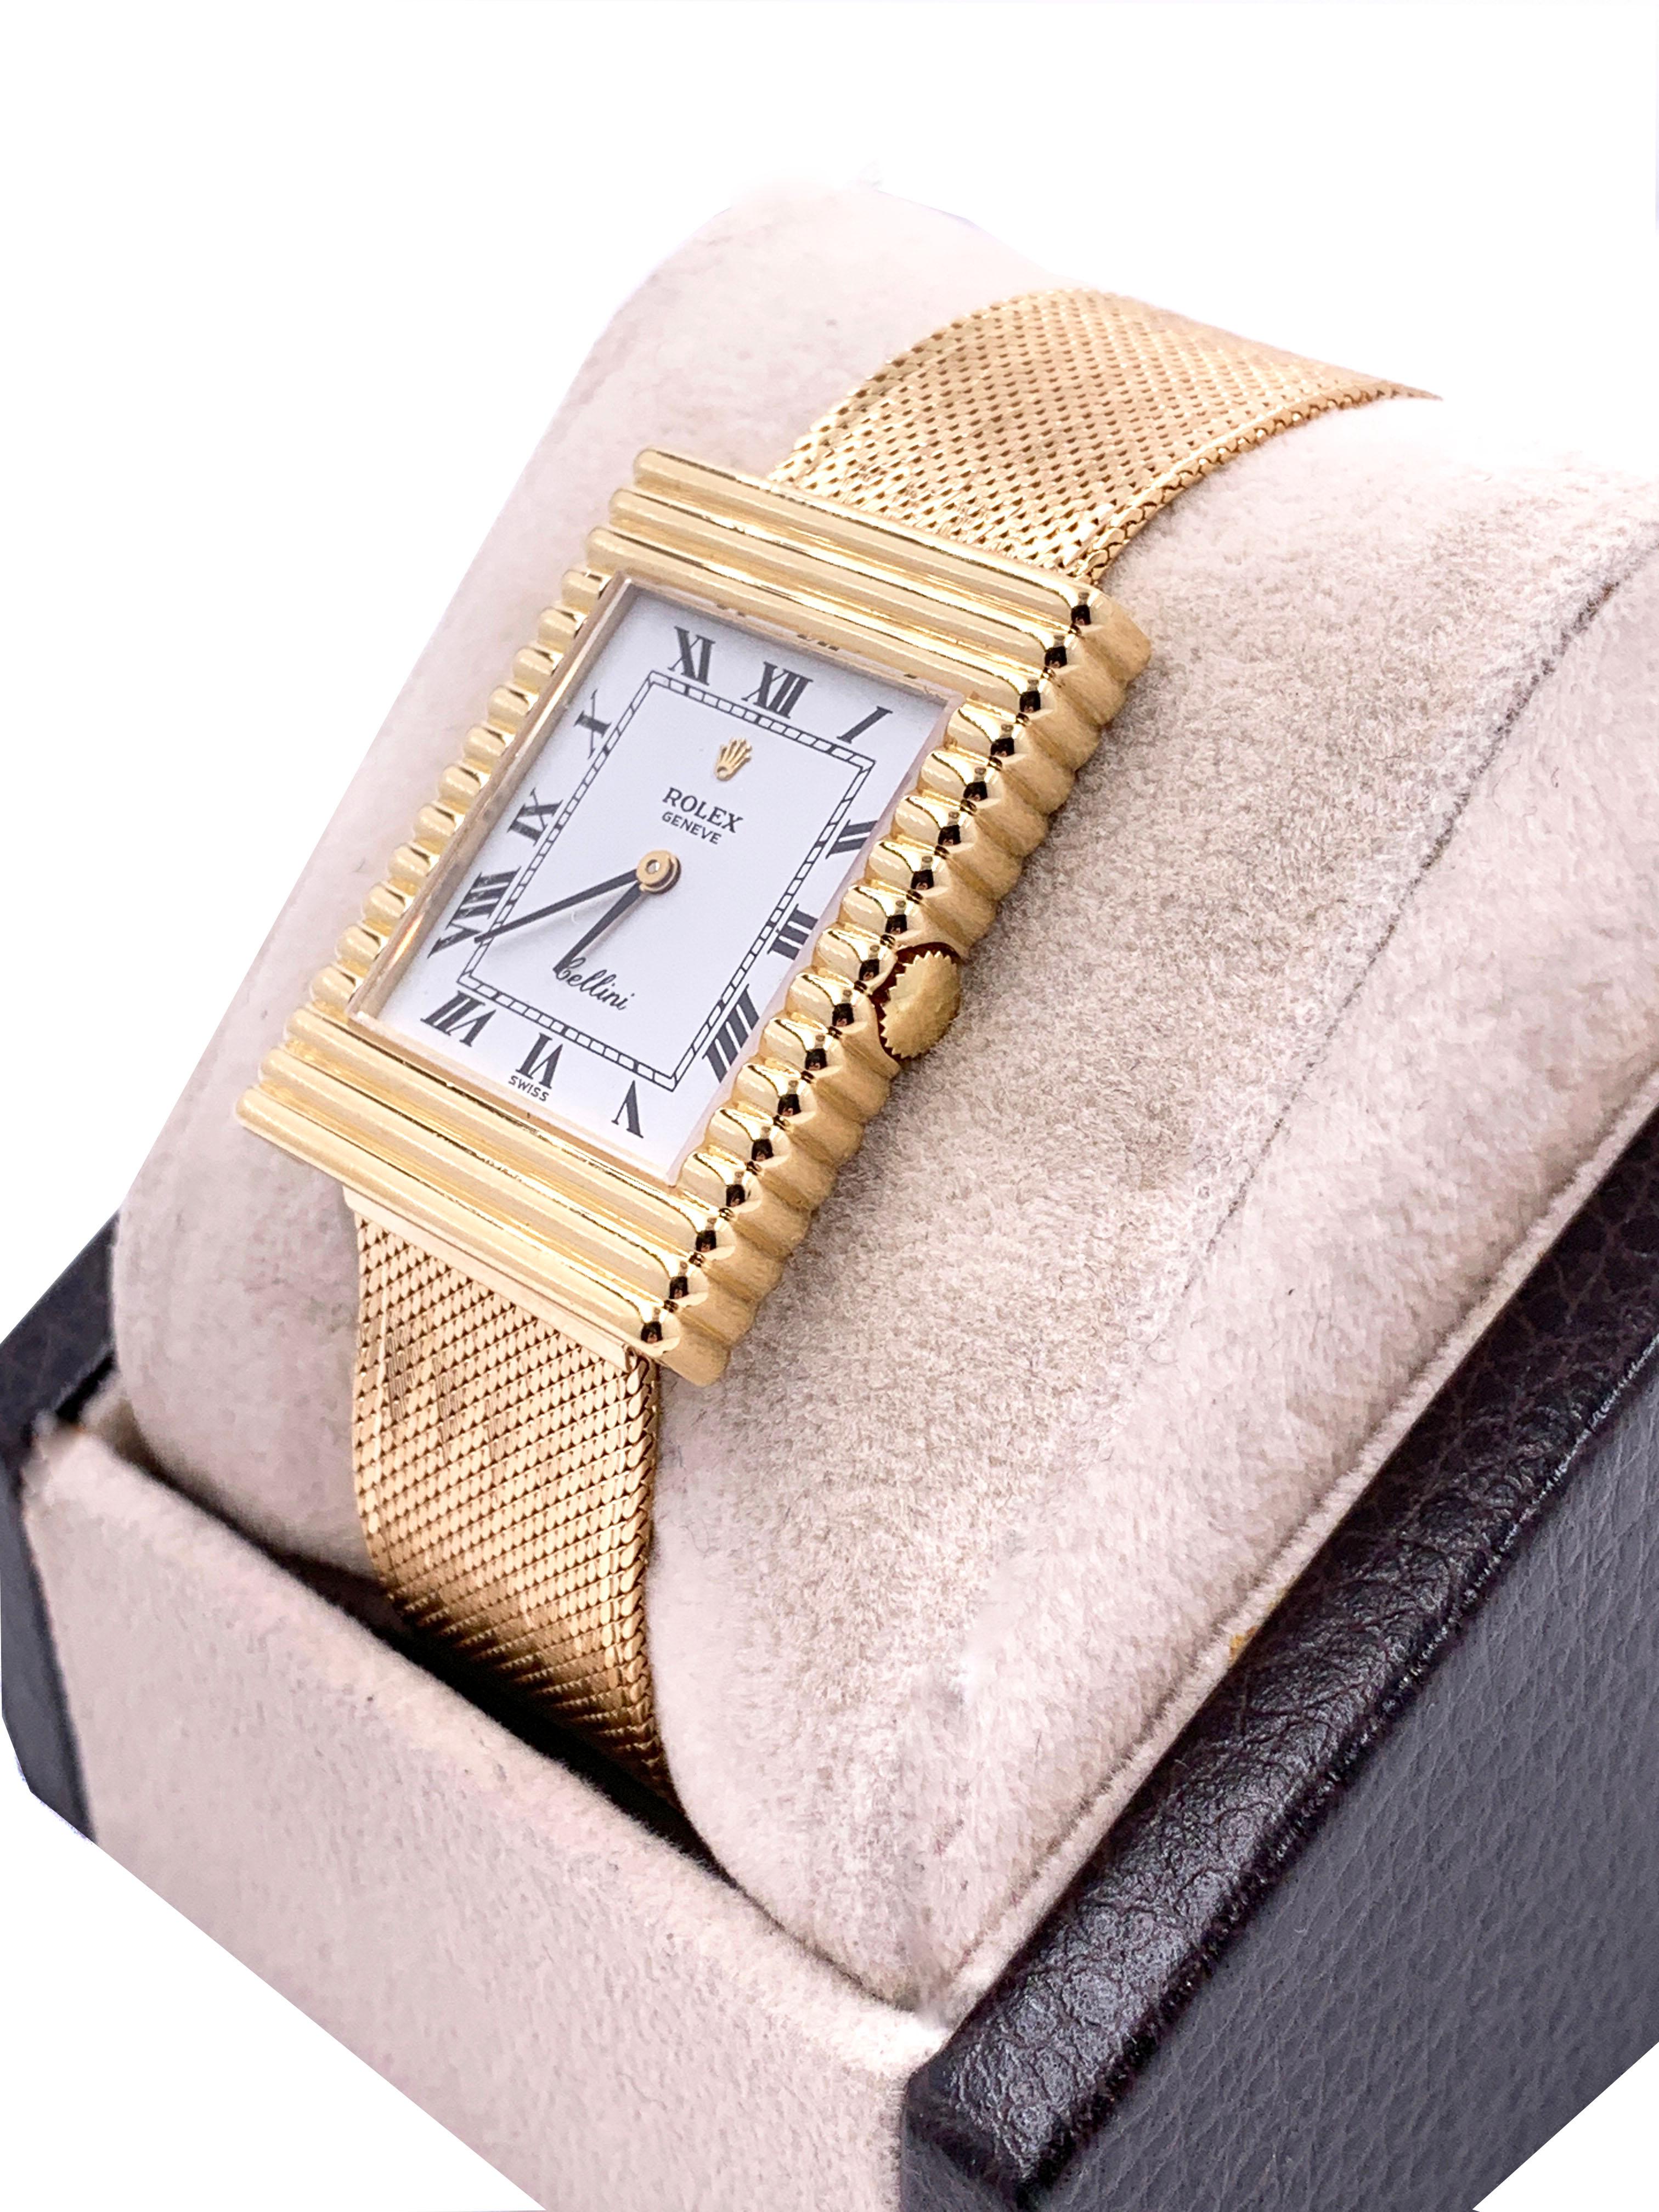 Style Number: 4012

 

Serial: 3839***



Model: Cellini

 

Case Material: 18K Yellow Gold 

 

Band: Custom 18K Yellow Gold 

 

Bezel:  18K Yellow Gold 

 

Dial: White 

 

Face: Sapphire Crystal 

 

Case Size: 30mm x 23mm 

 

Includes: